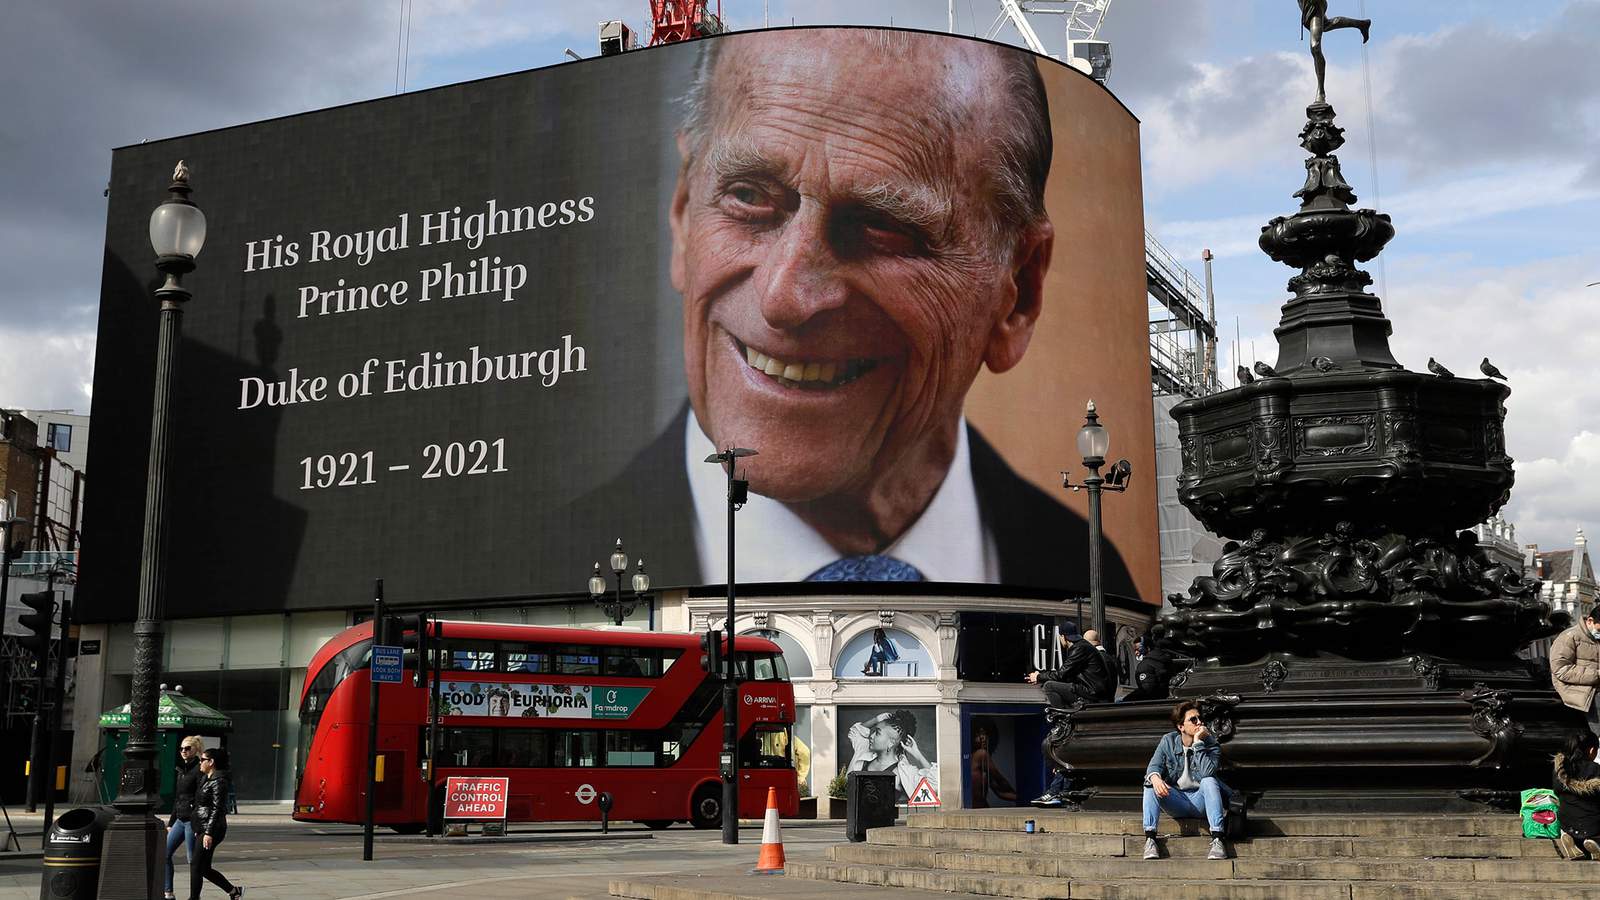 Live stream: Prince Philip’s funeral procession and service at Windsor Castle